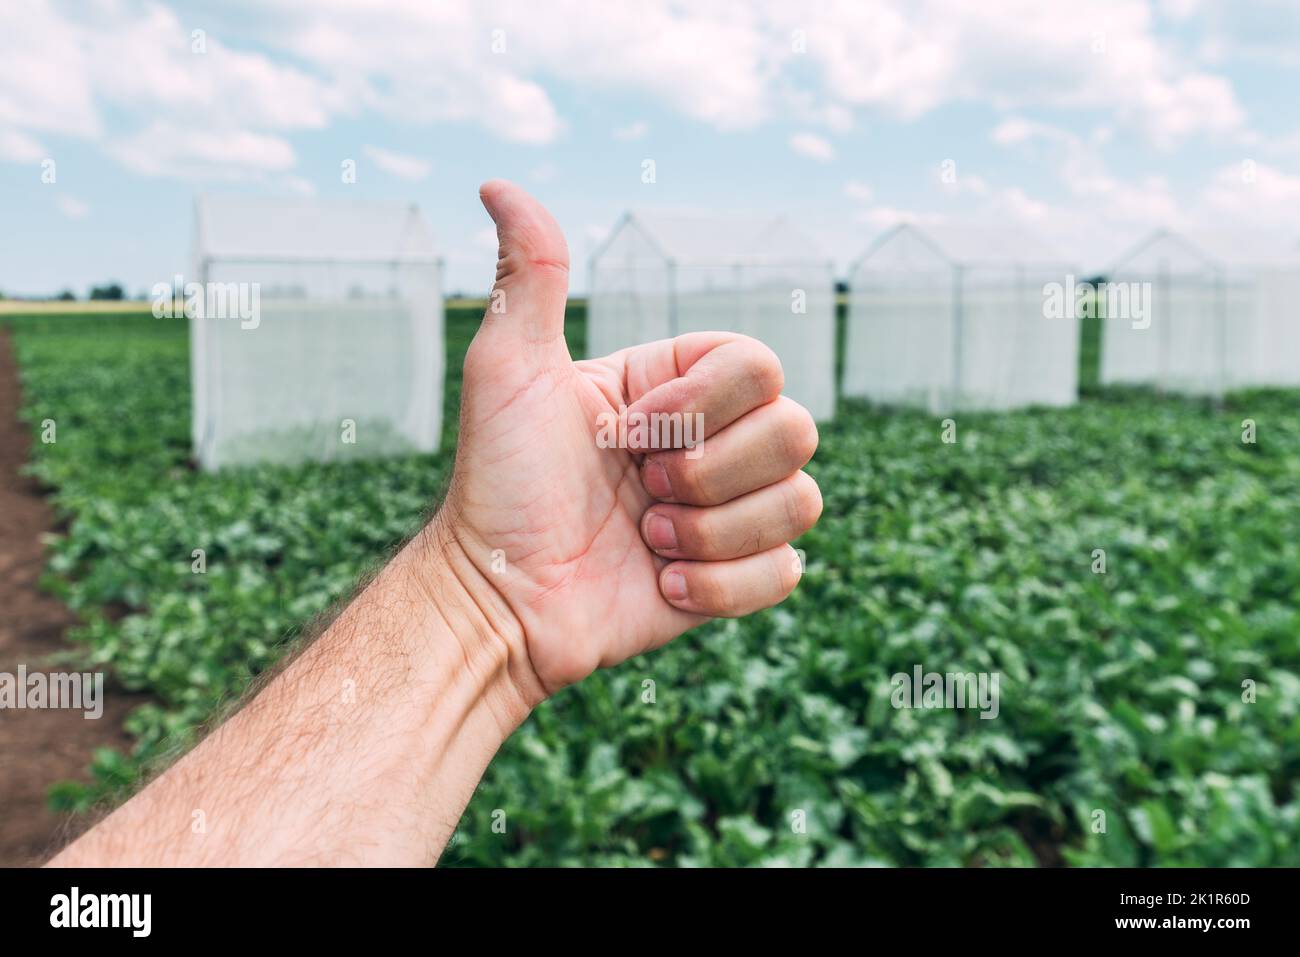 Farm worker gesturing thumbs up in front of sugar beet pollination control tents in cultivated field, selective focus Stock Photo